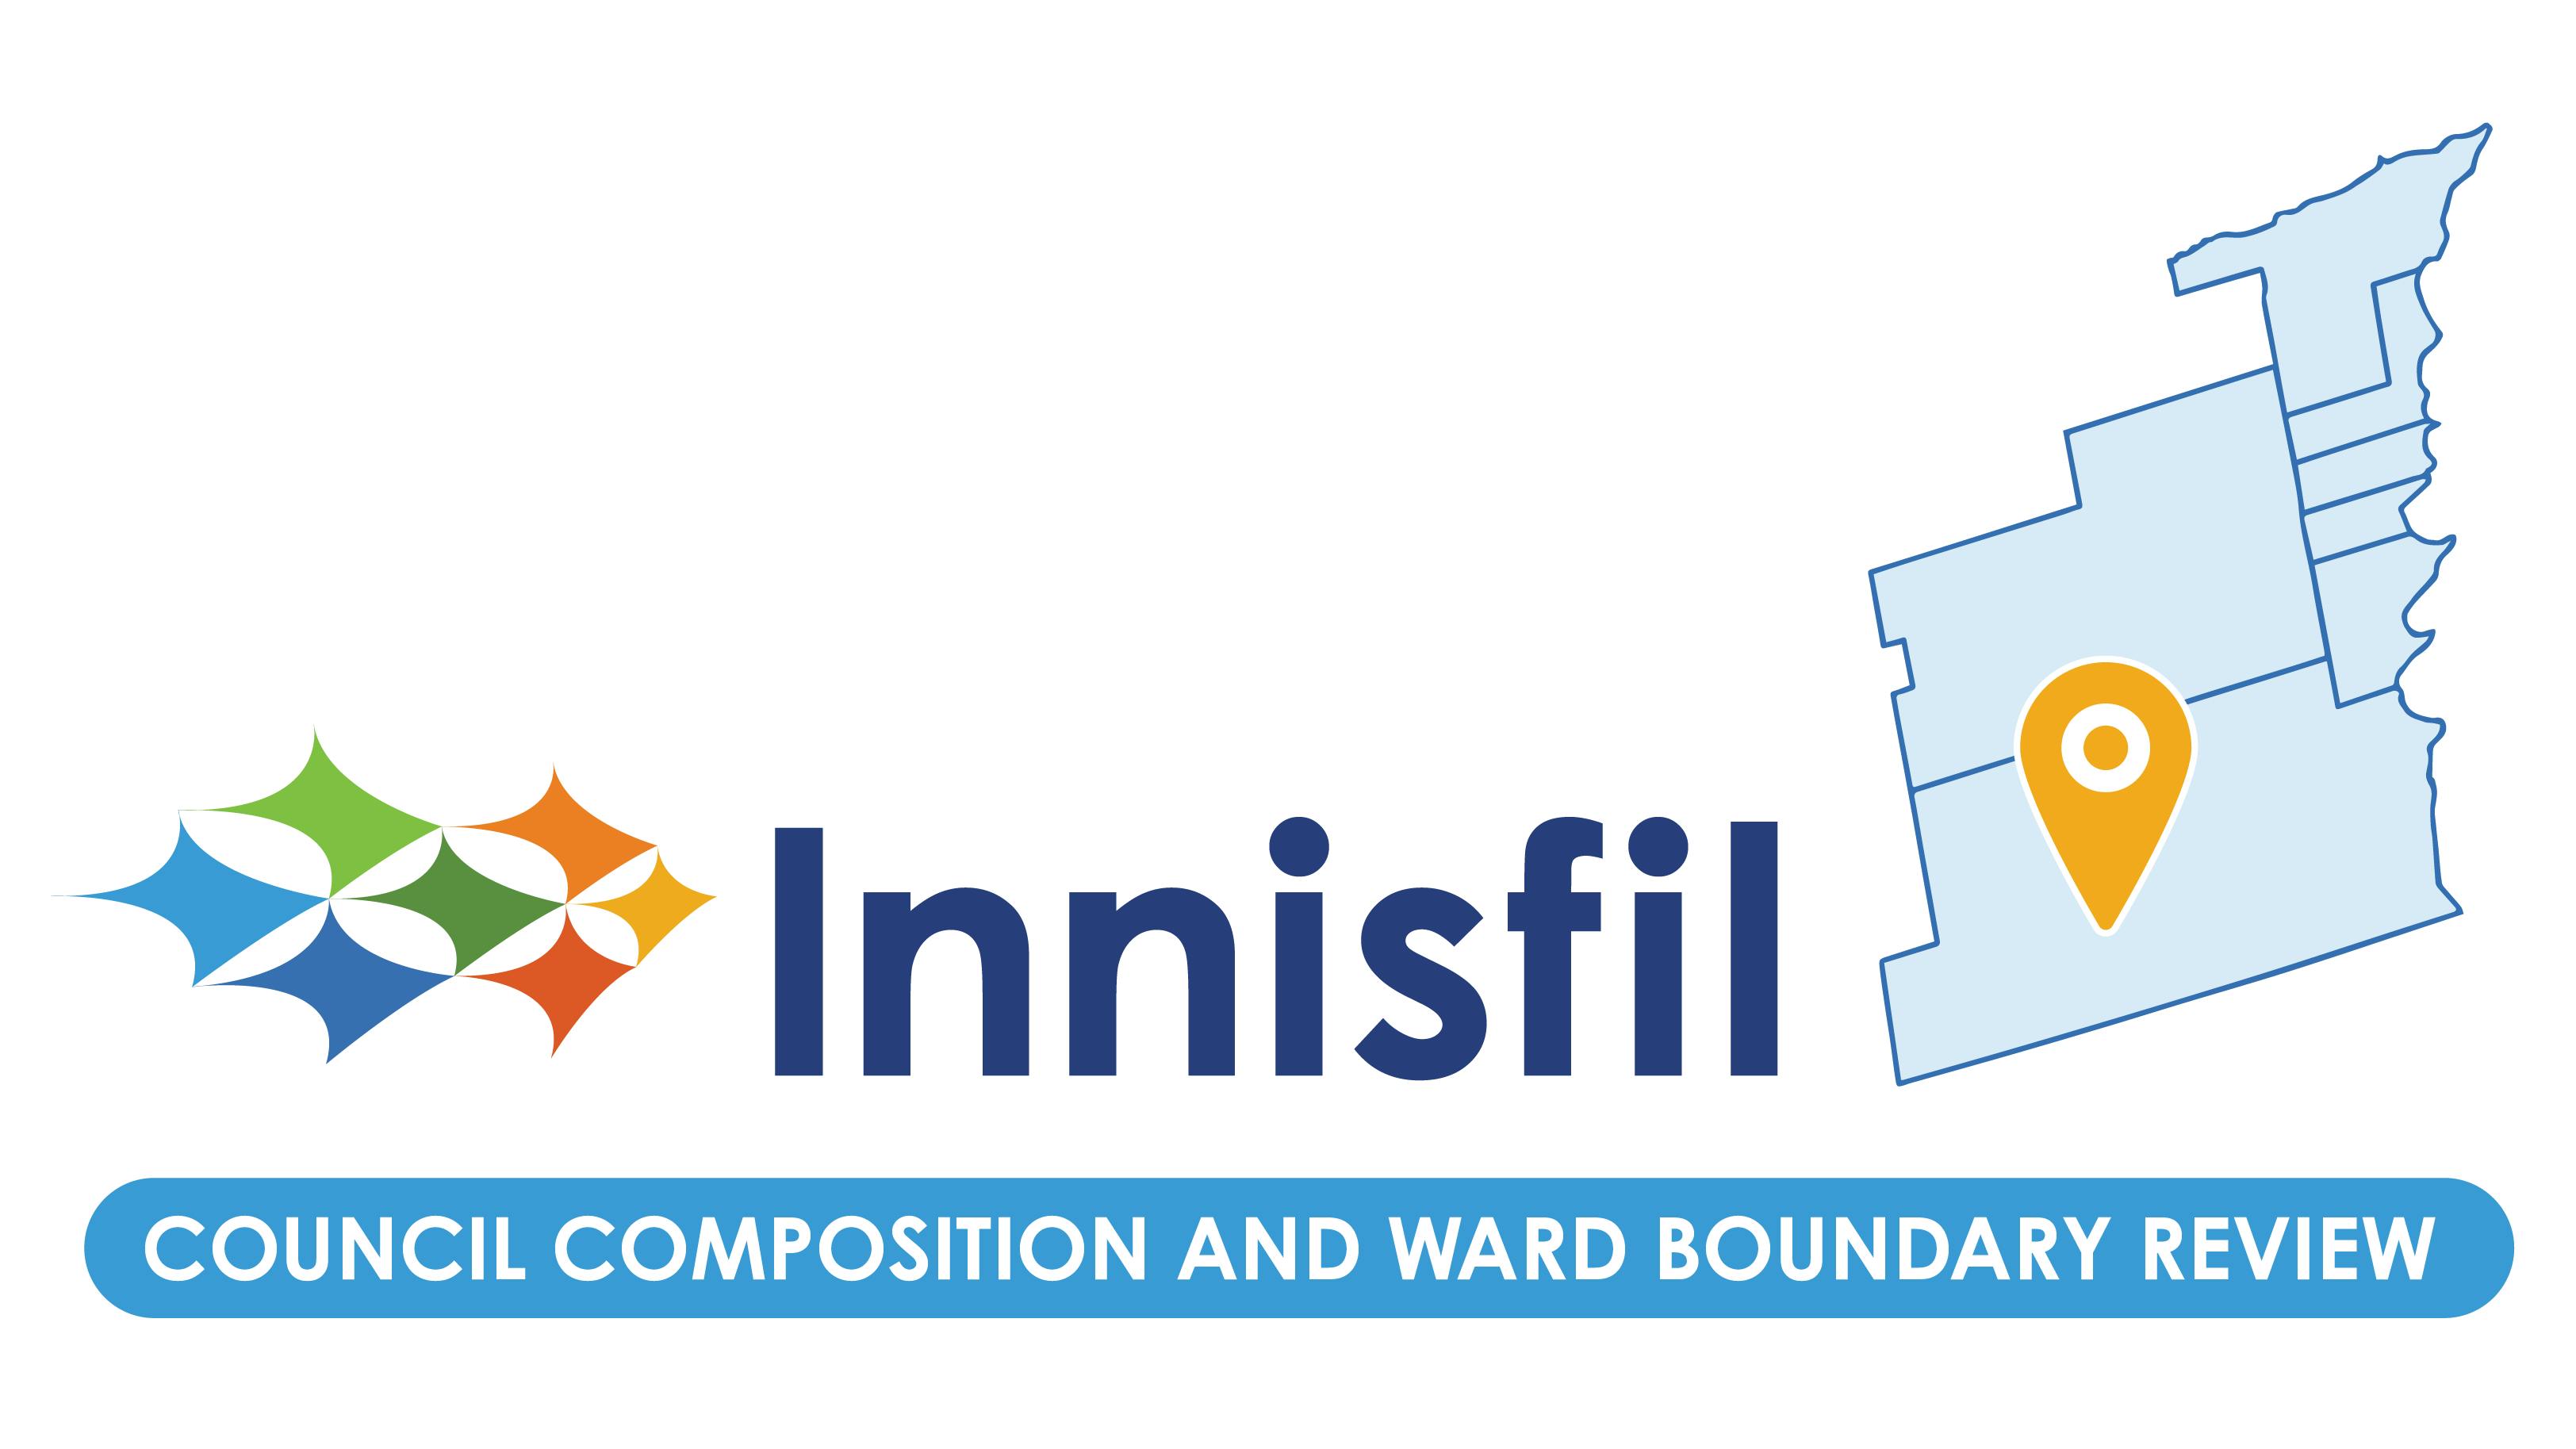 Council Composition and Ward Boundary Review logo